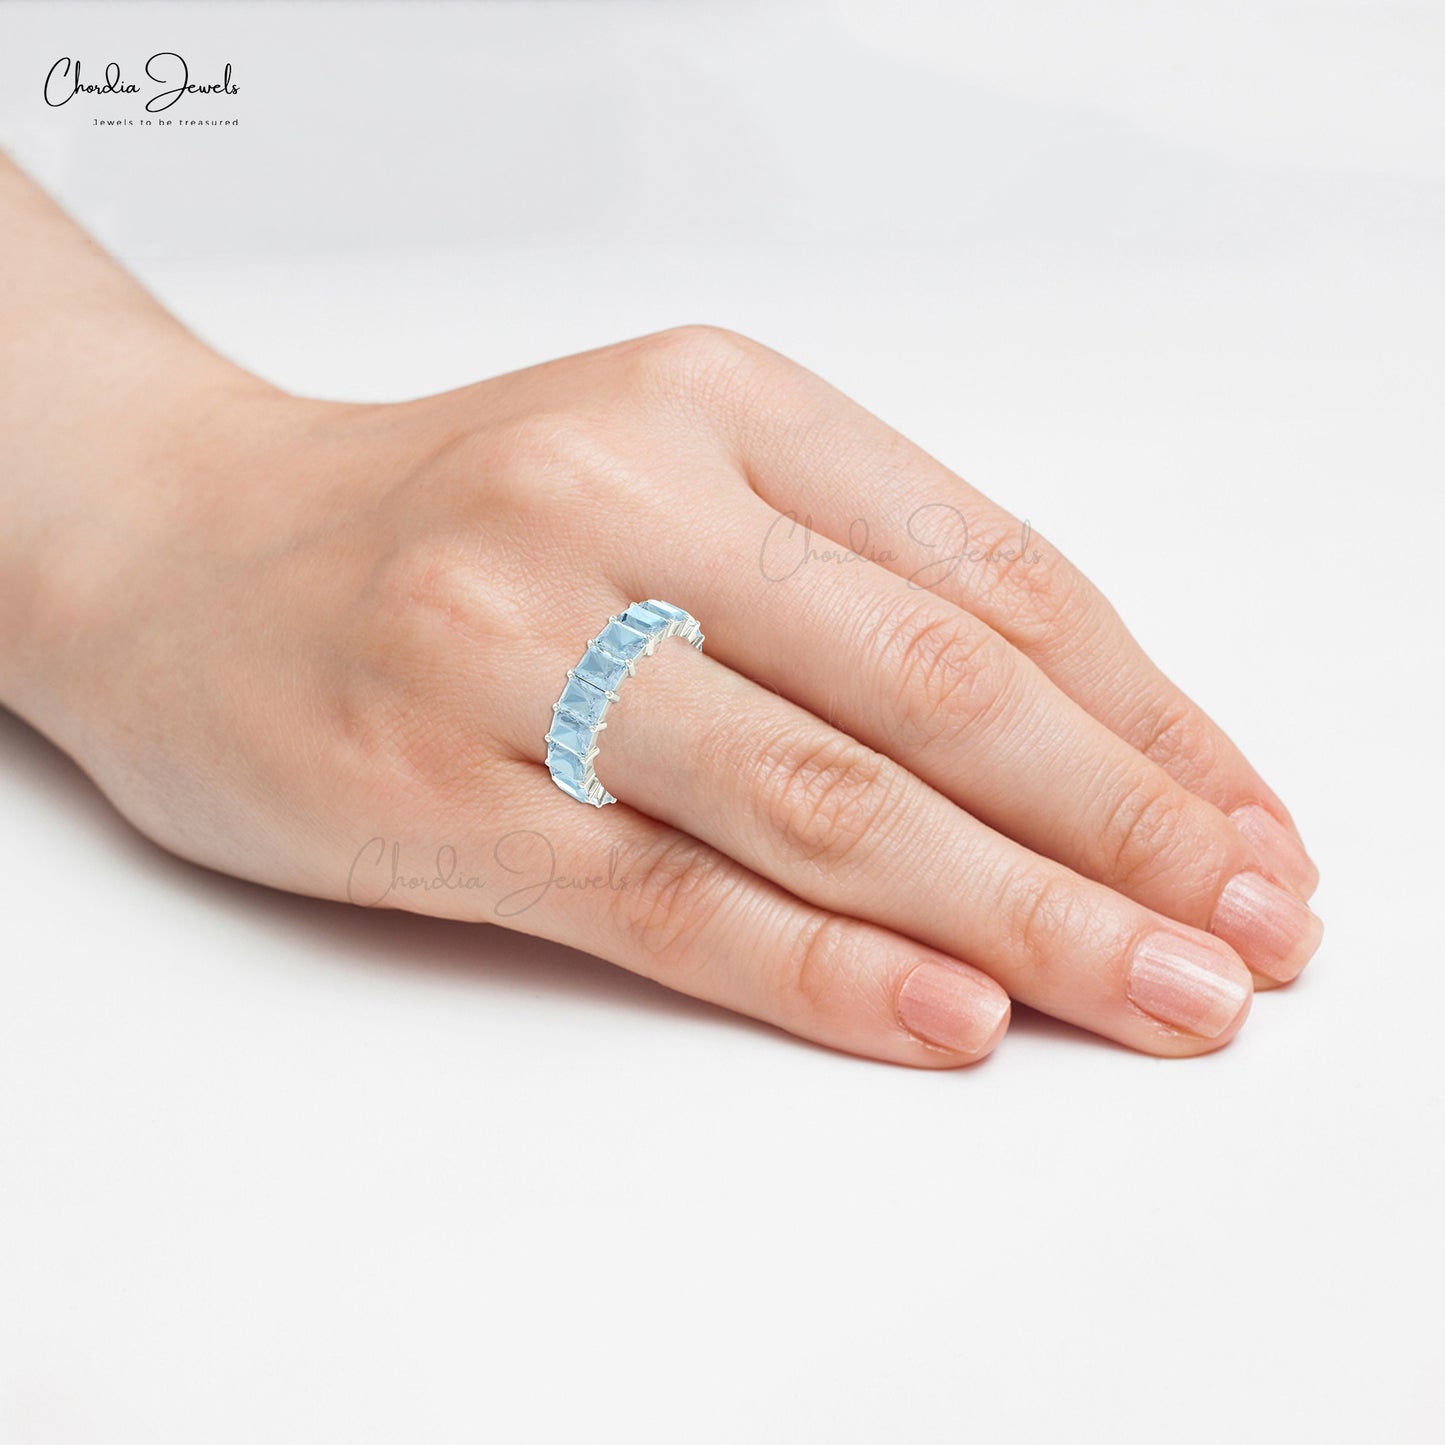 Load image into Gallery viewer, Natural Aquamarine Half Eternity Band in 14k Solid Gold
